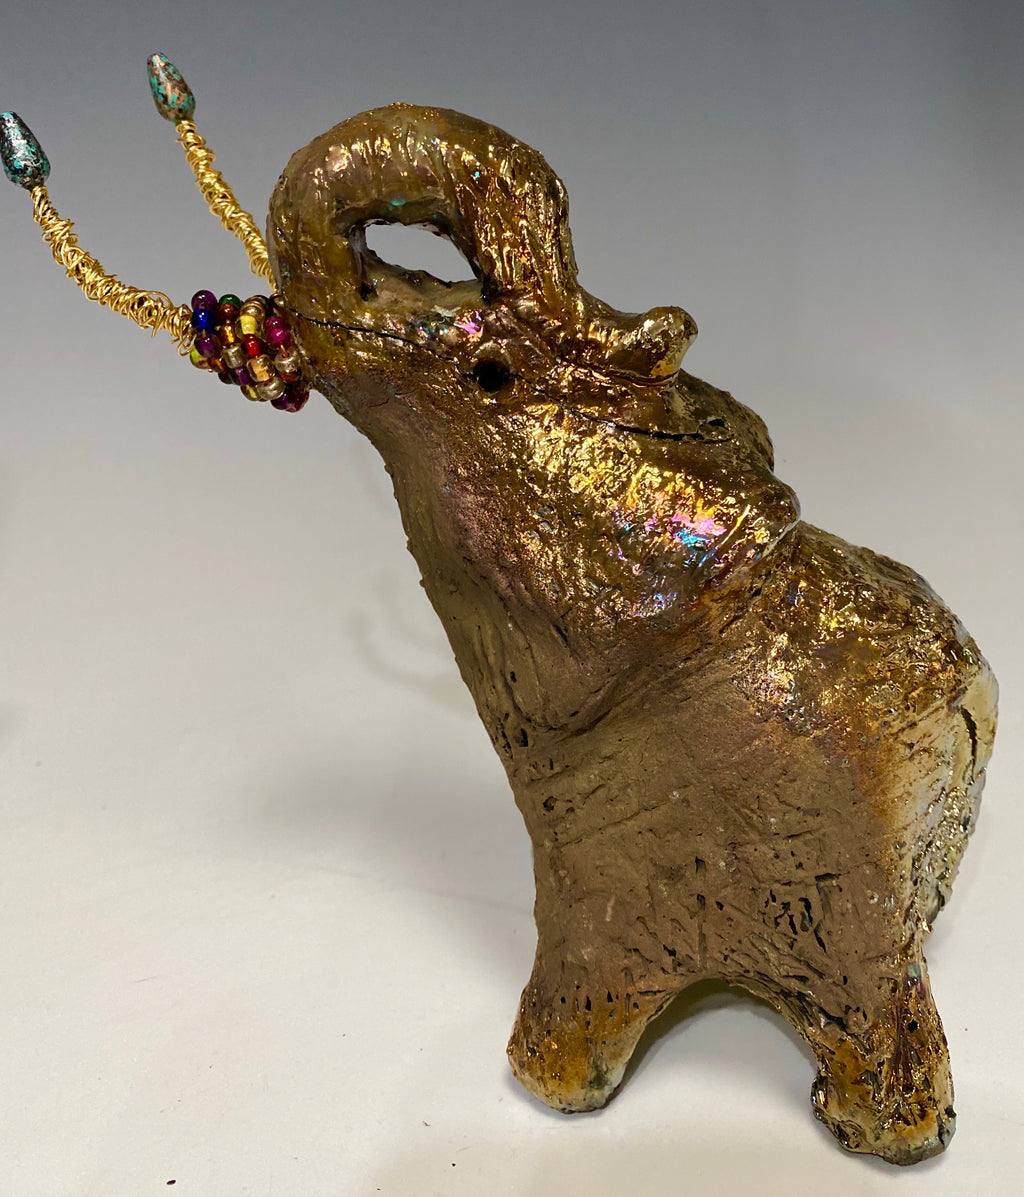 Have you HERD!!!!!!     Elephants are one of my favorite animals to create. They are so majestic"  Just one of these lovely Raku Fired Elephant will make an excellent gift for your  BFF,  or just for you .    This raku fired elephant stands 6" x 4" x 6" and weighs 1.3 lb. She has beaded tusks and a textured glossy gold and copper metallic body. This one is nice to add your Herdew Collection!